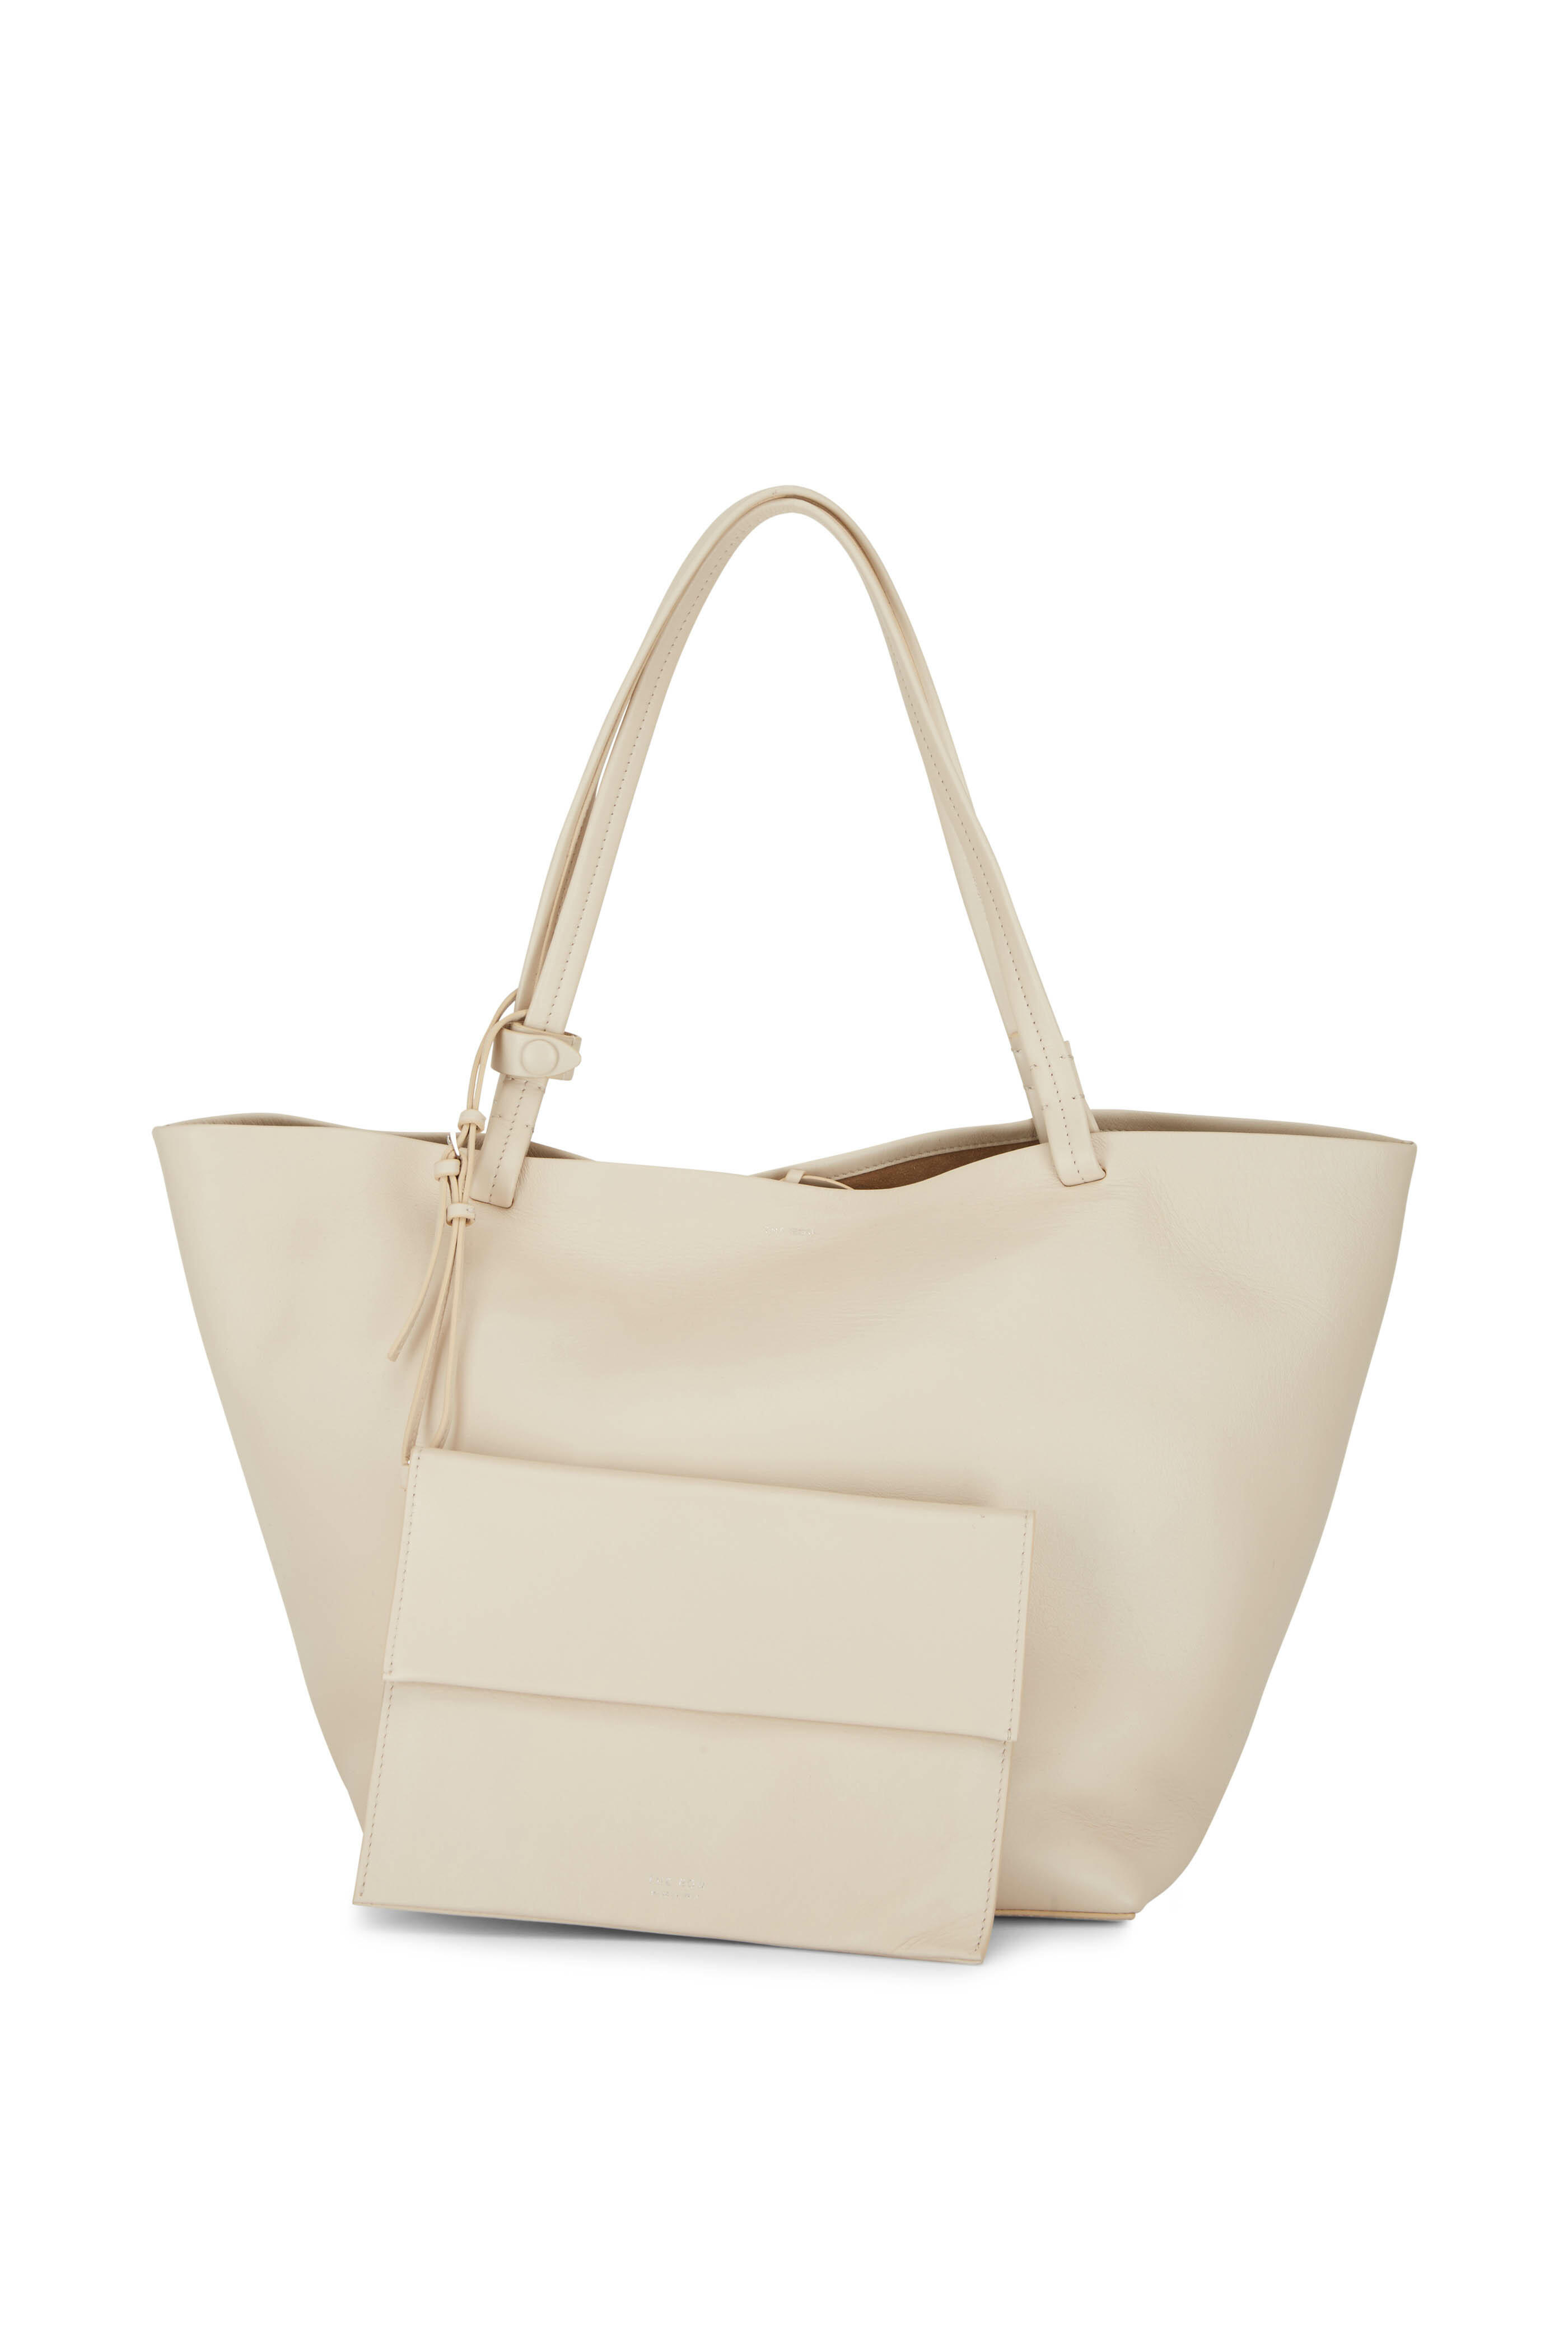 The Row - Park Tote Three Vanilla Smooth Leather Tote